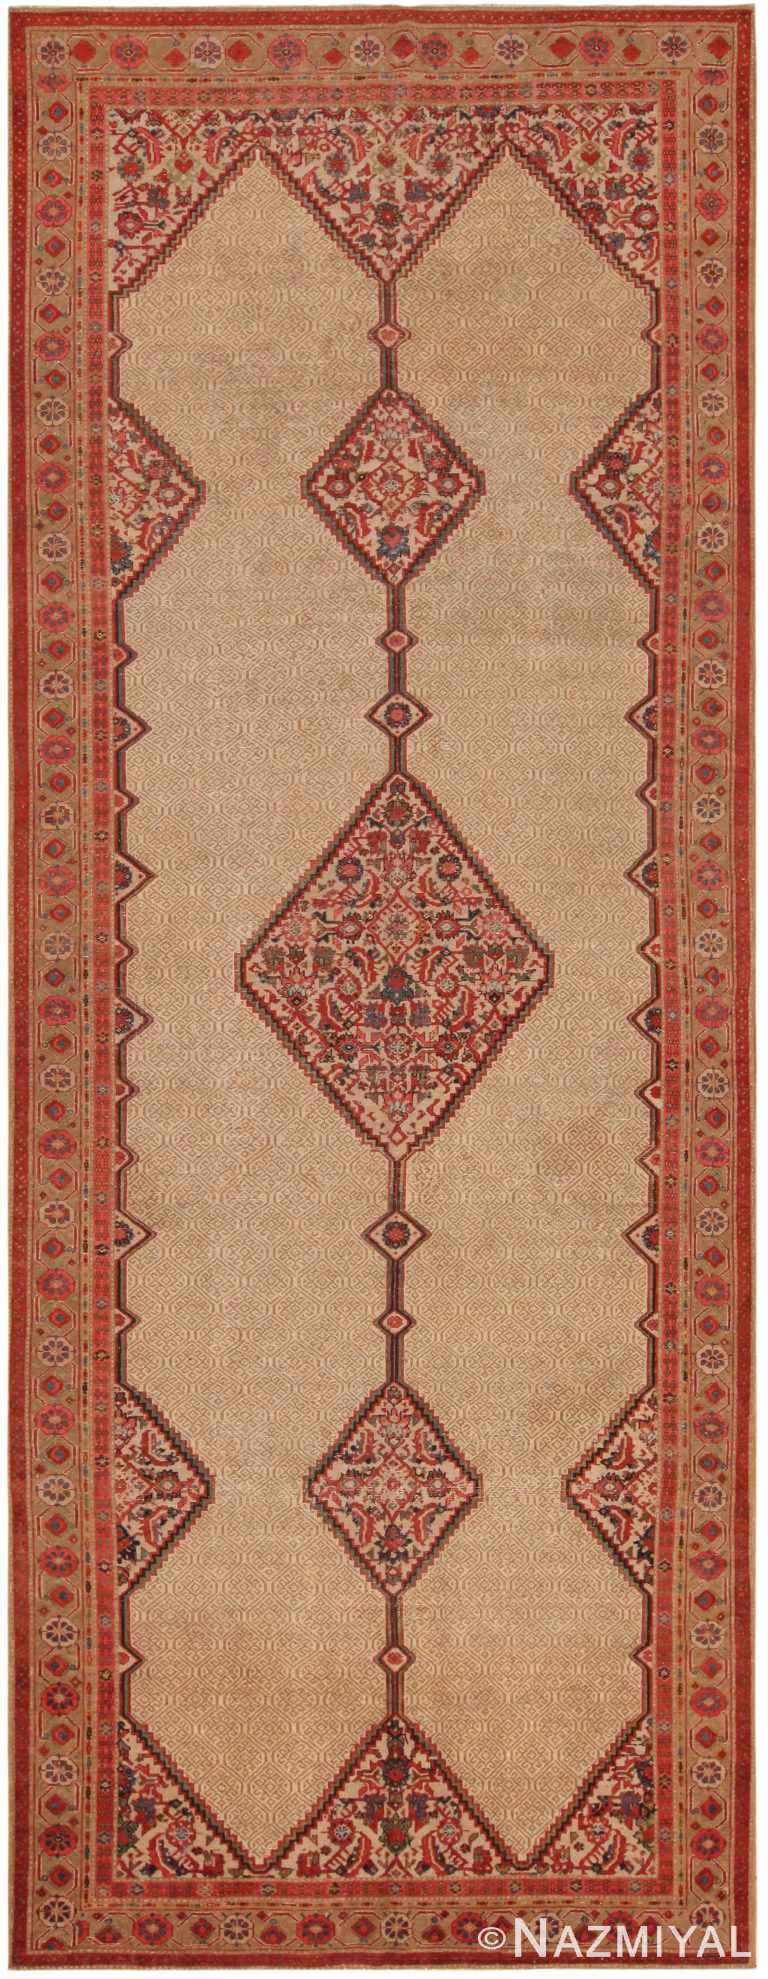 Gallery Size Antique Persian Serab Tribal Rug 71987 by Nazmiyal Antique Rugs